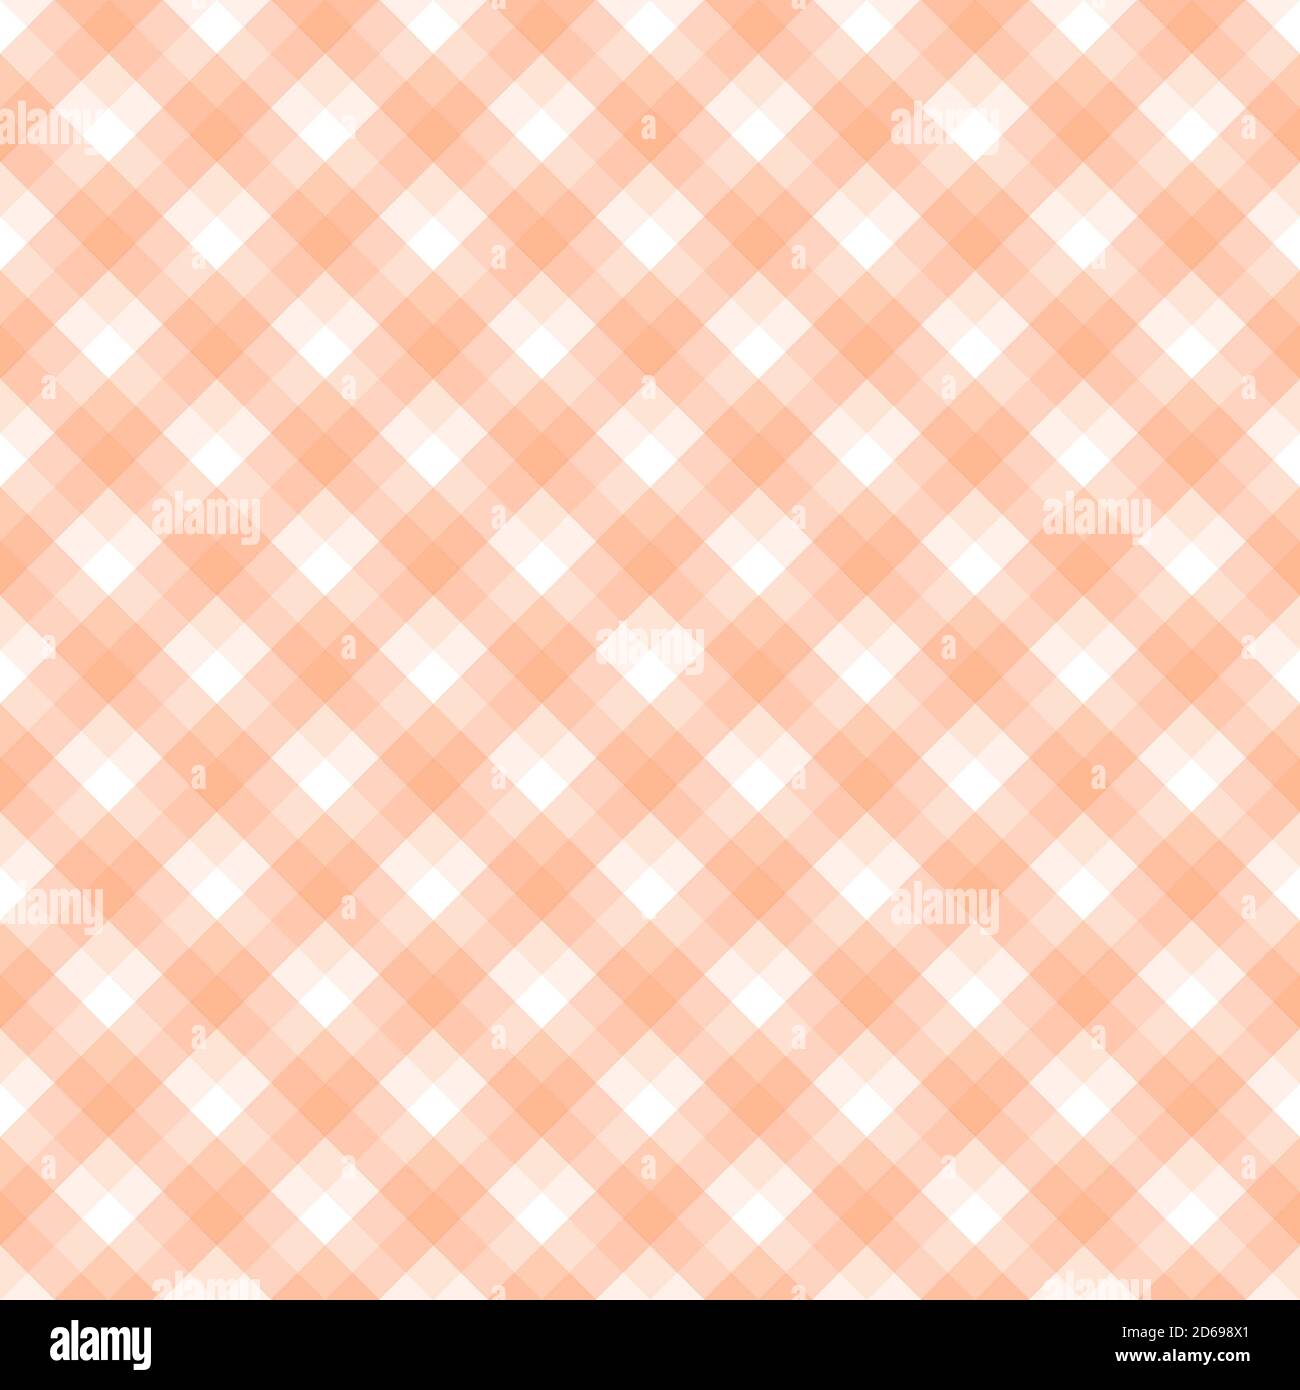 Checker pattern in hues of vdeep peach and white, seamless background Stock Photo